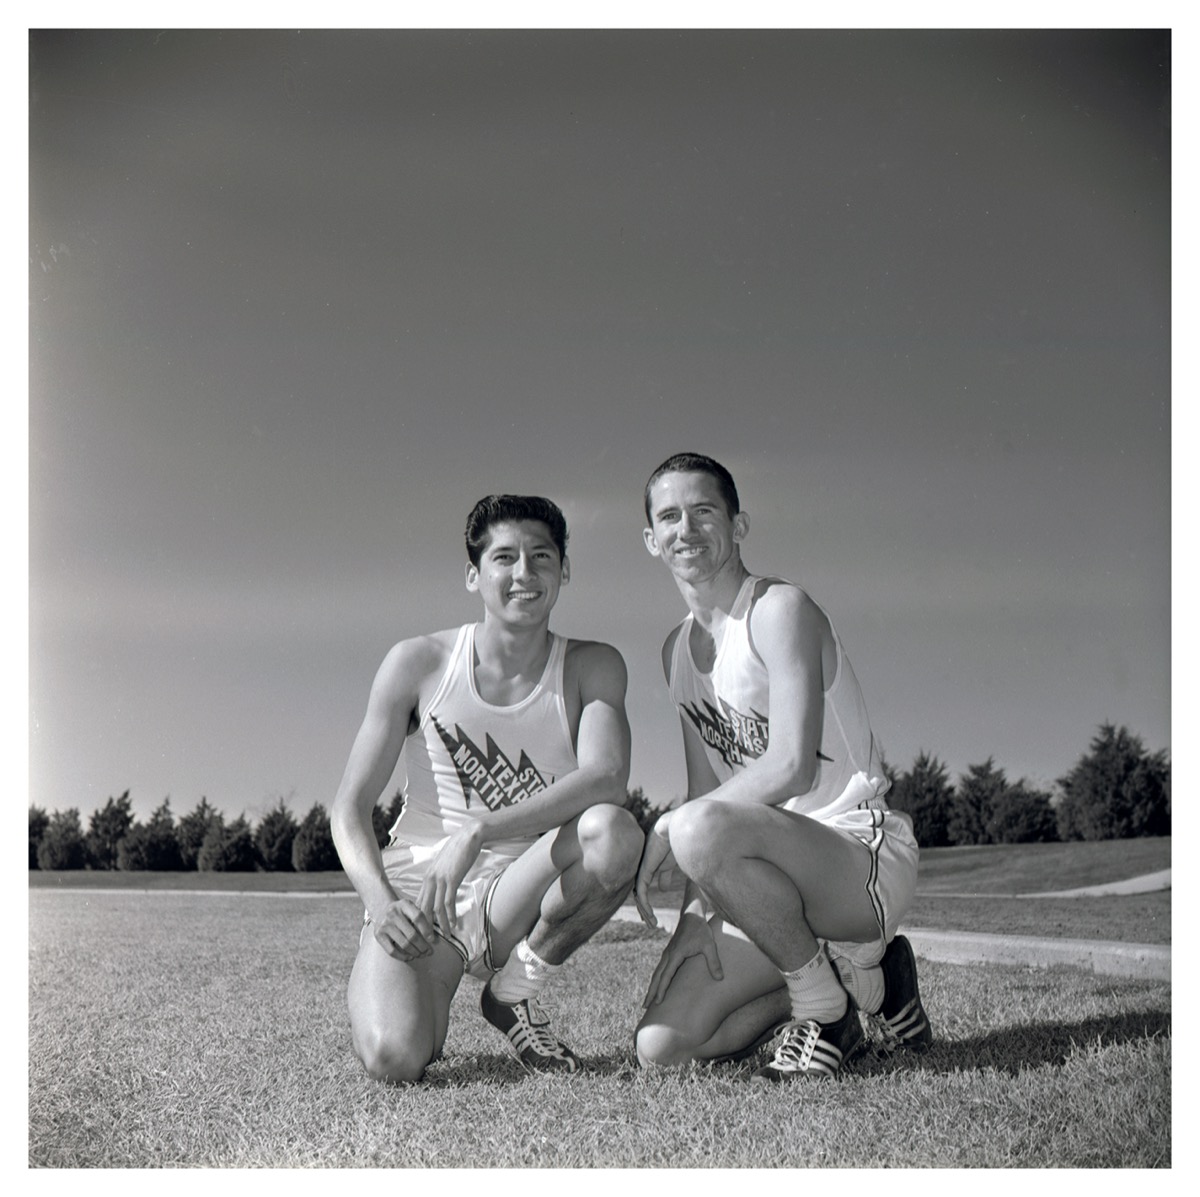 Black and white photo. Two men kneel down posing side by side each other. The both wear the same  white shorts and white tank tops. They are kneeling on the grass, with sky  and an outline of trees behind them in the distance.